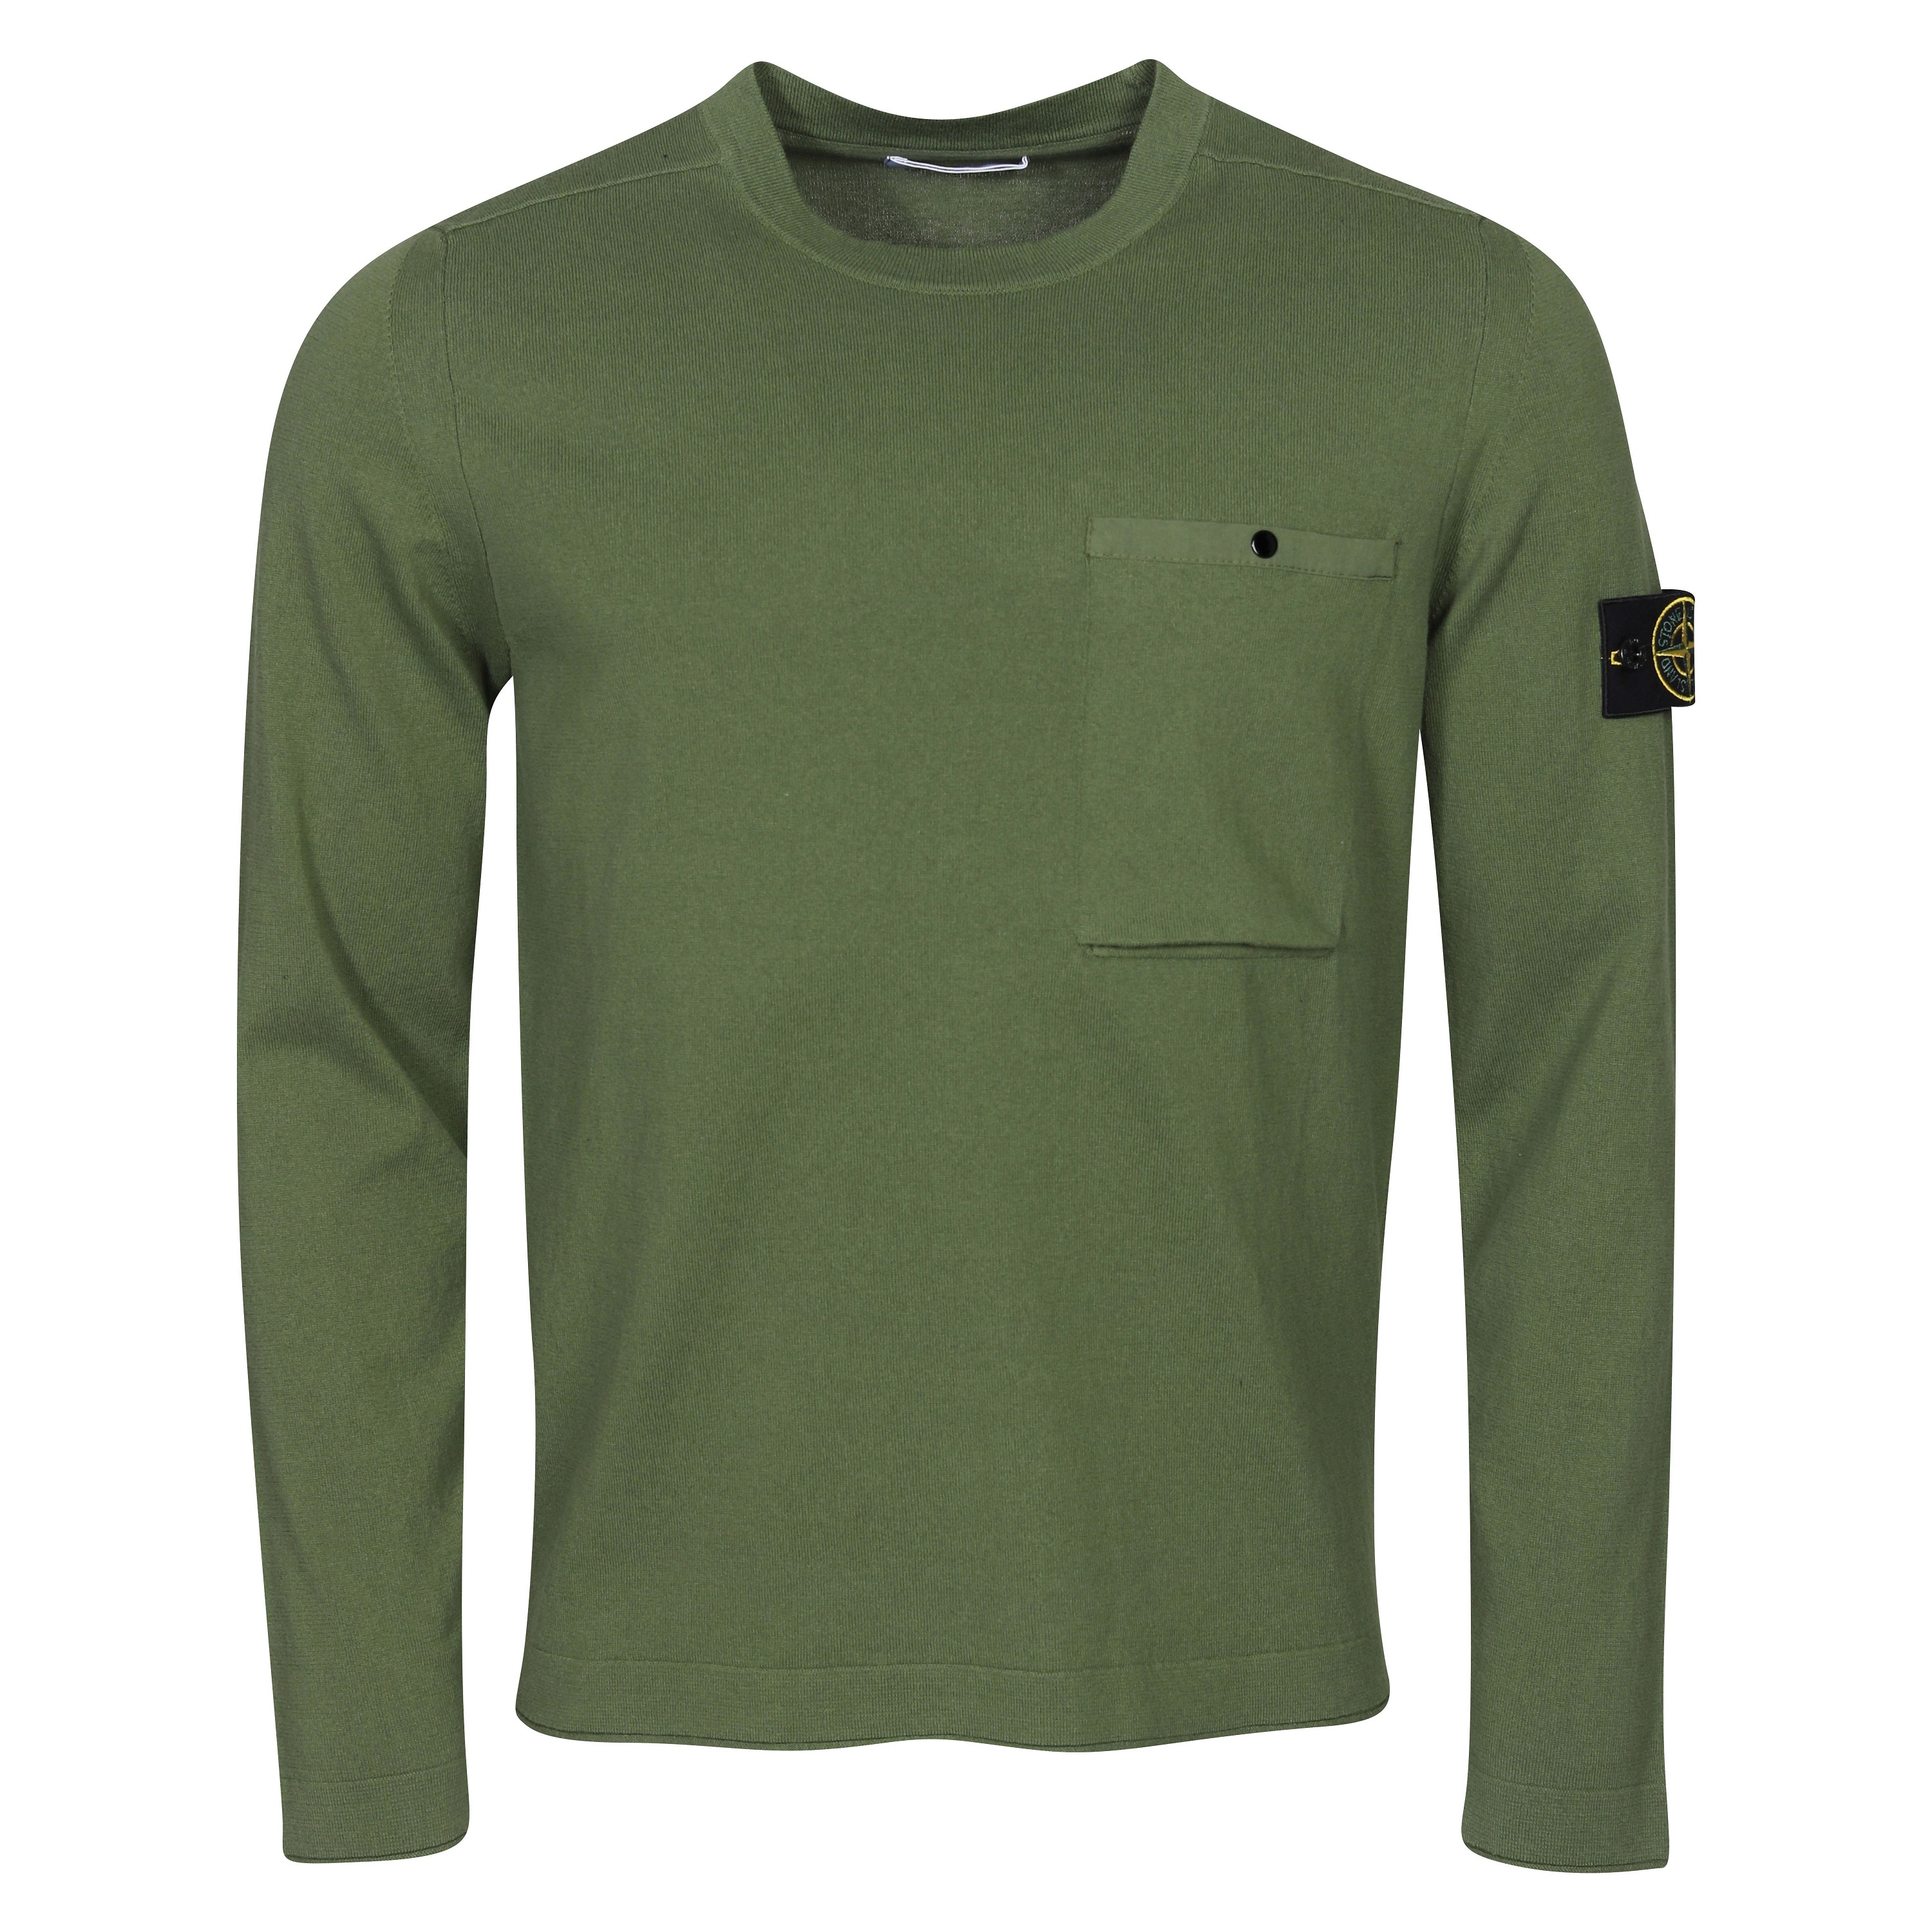 Stone Island Chest Pocket Knit Sweater in Olive  XL